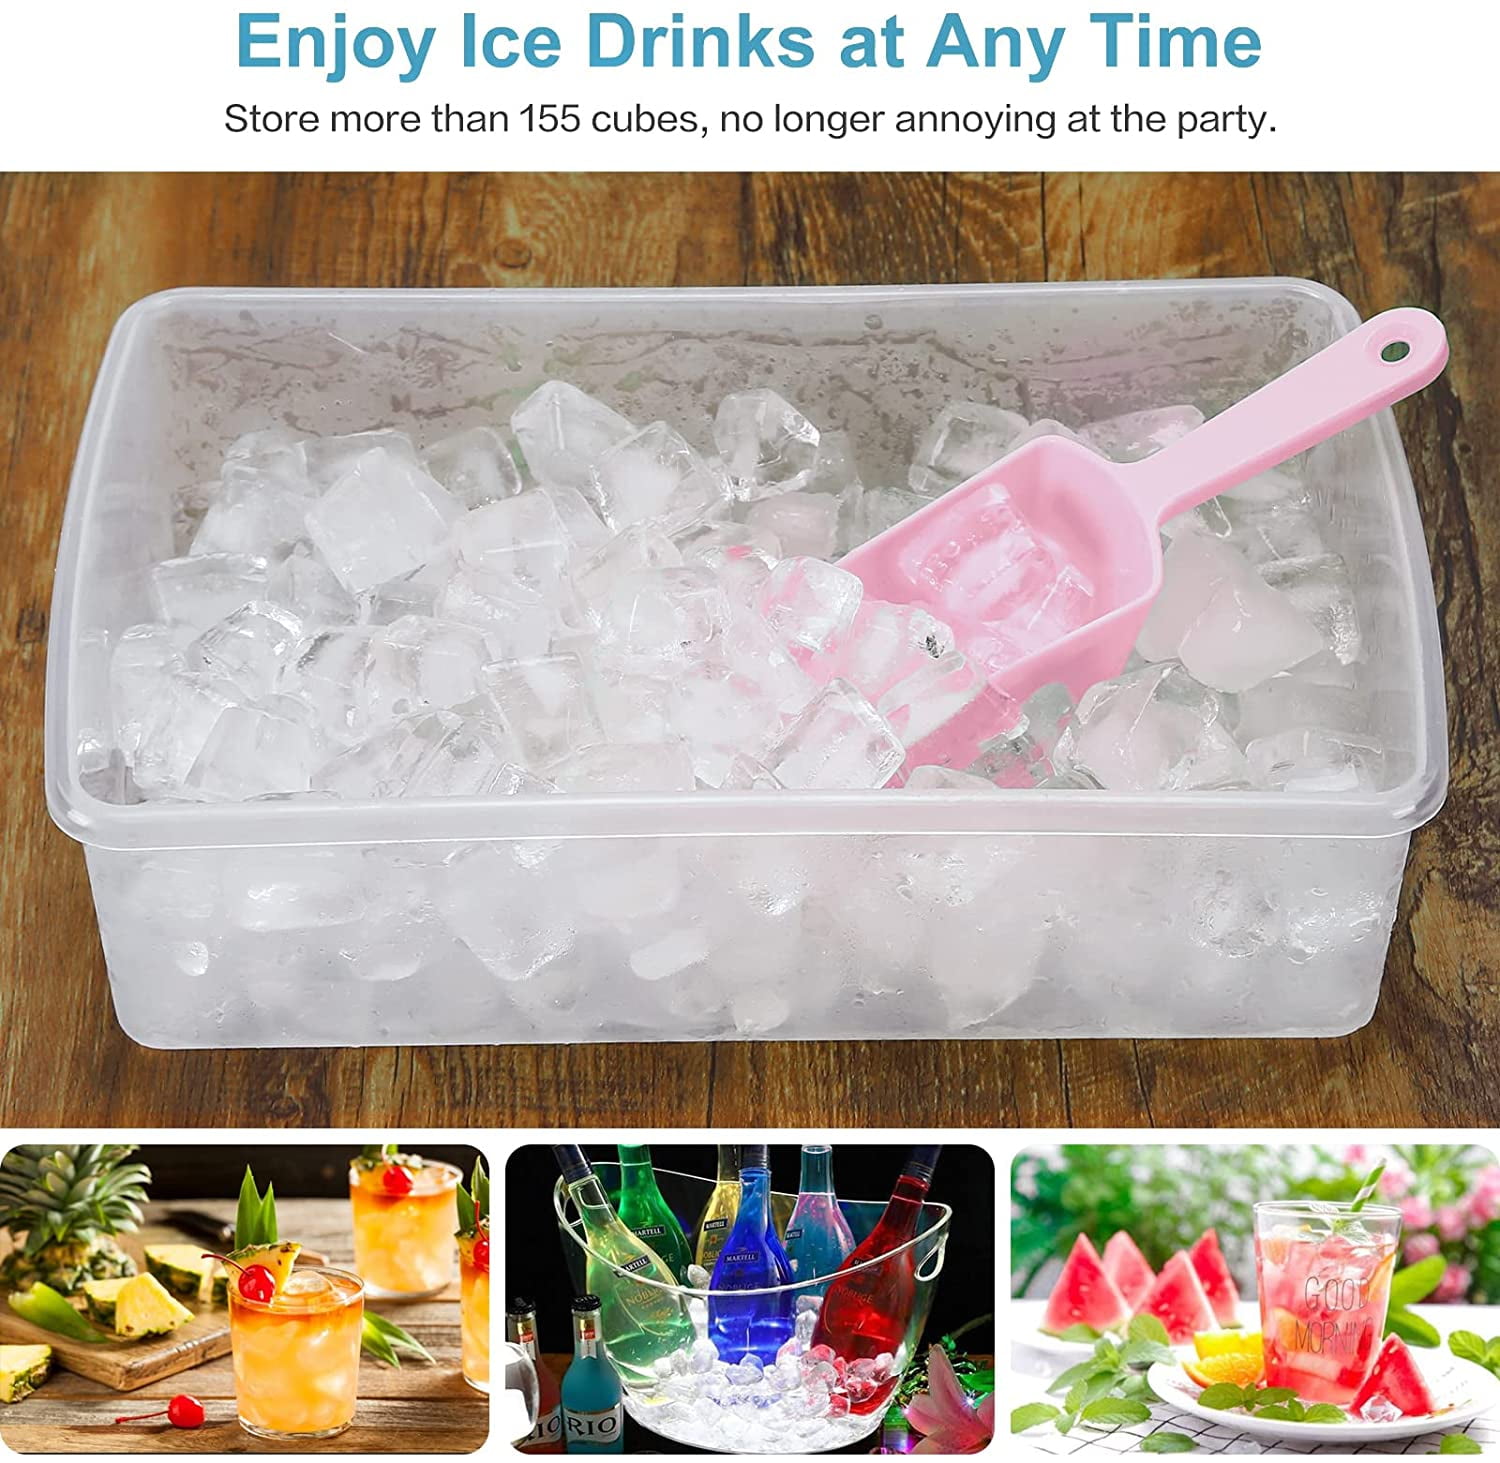 Dreiklang Be Smart Robust Single Ice Cube Mold Ice Cube Container